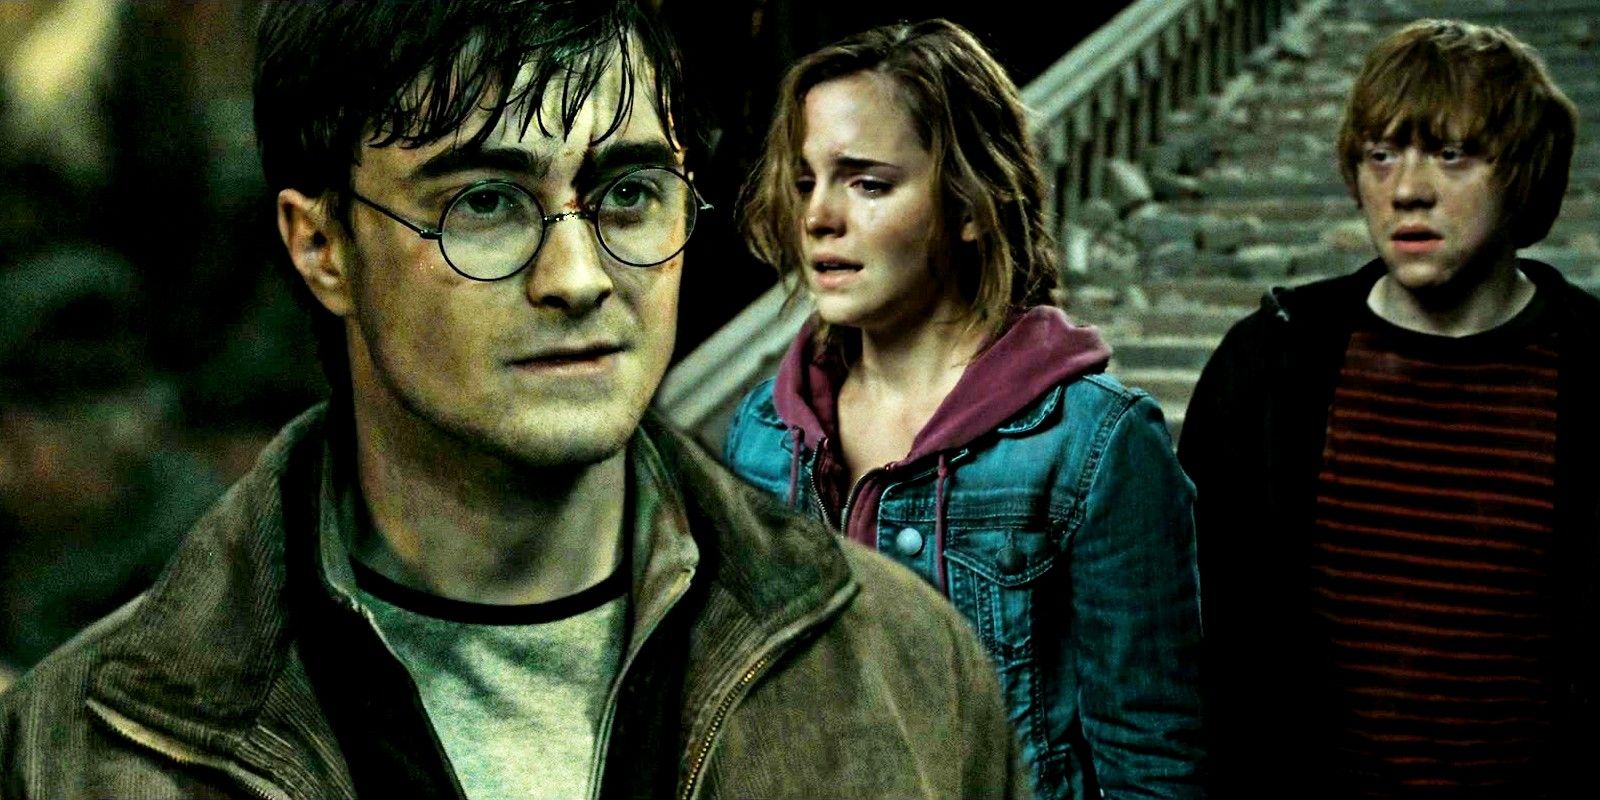 Daniel Radcliffe’s True Feelings About Recasting Harry Potter For Upcoming TV Show Revealed